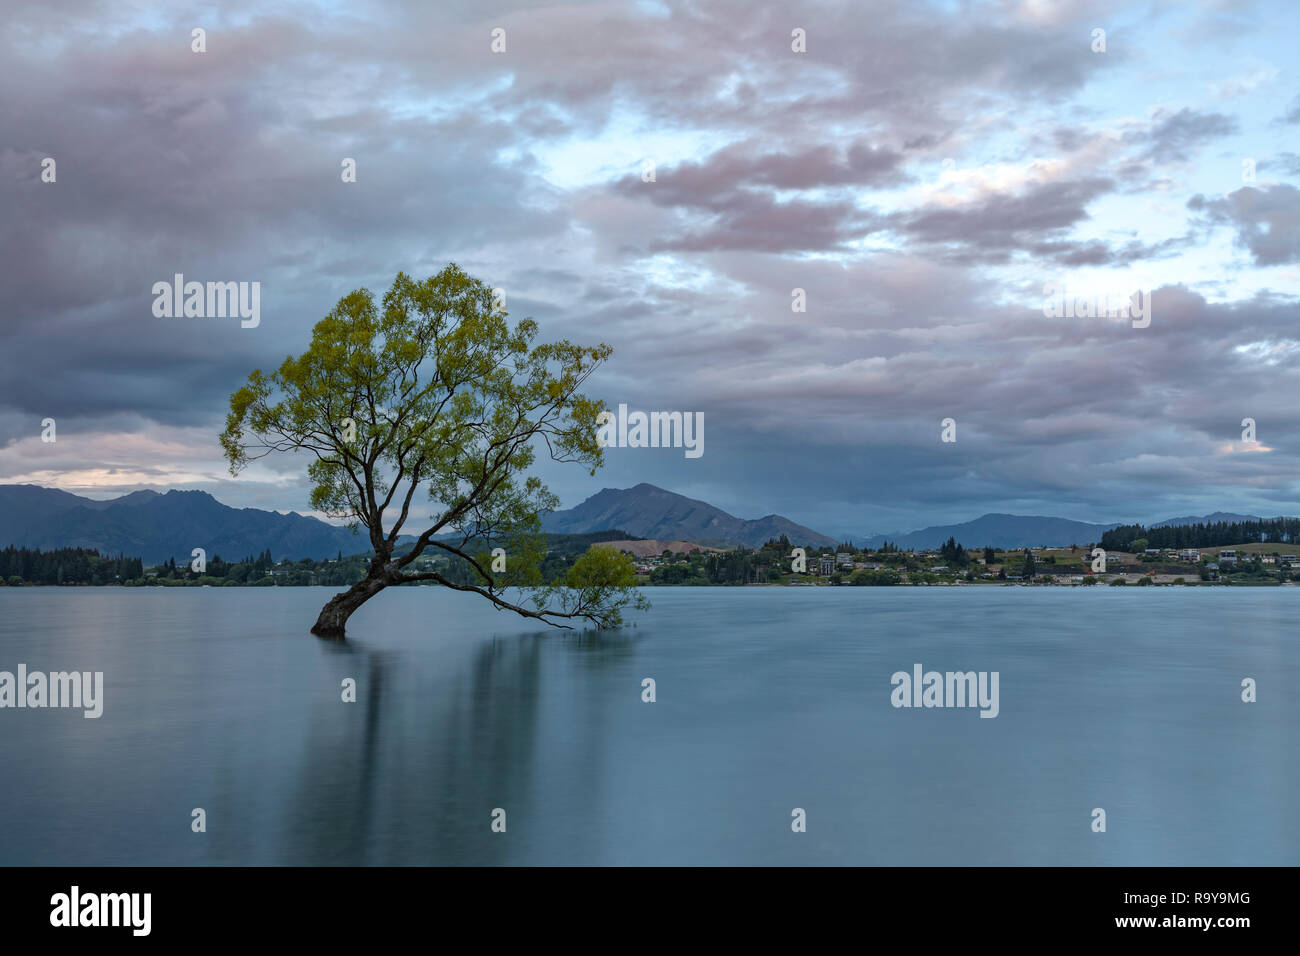 Wanaka, Otago, Queenstown Lakes District, South Island, New Zealand Stock Photo